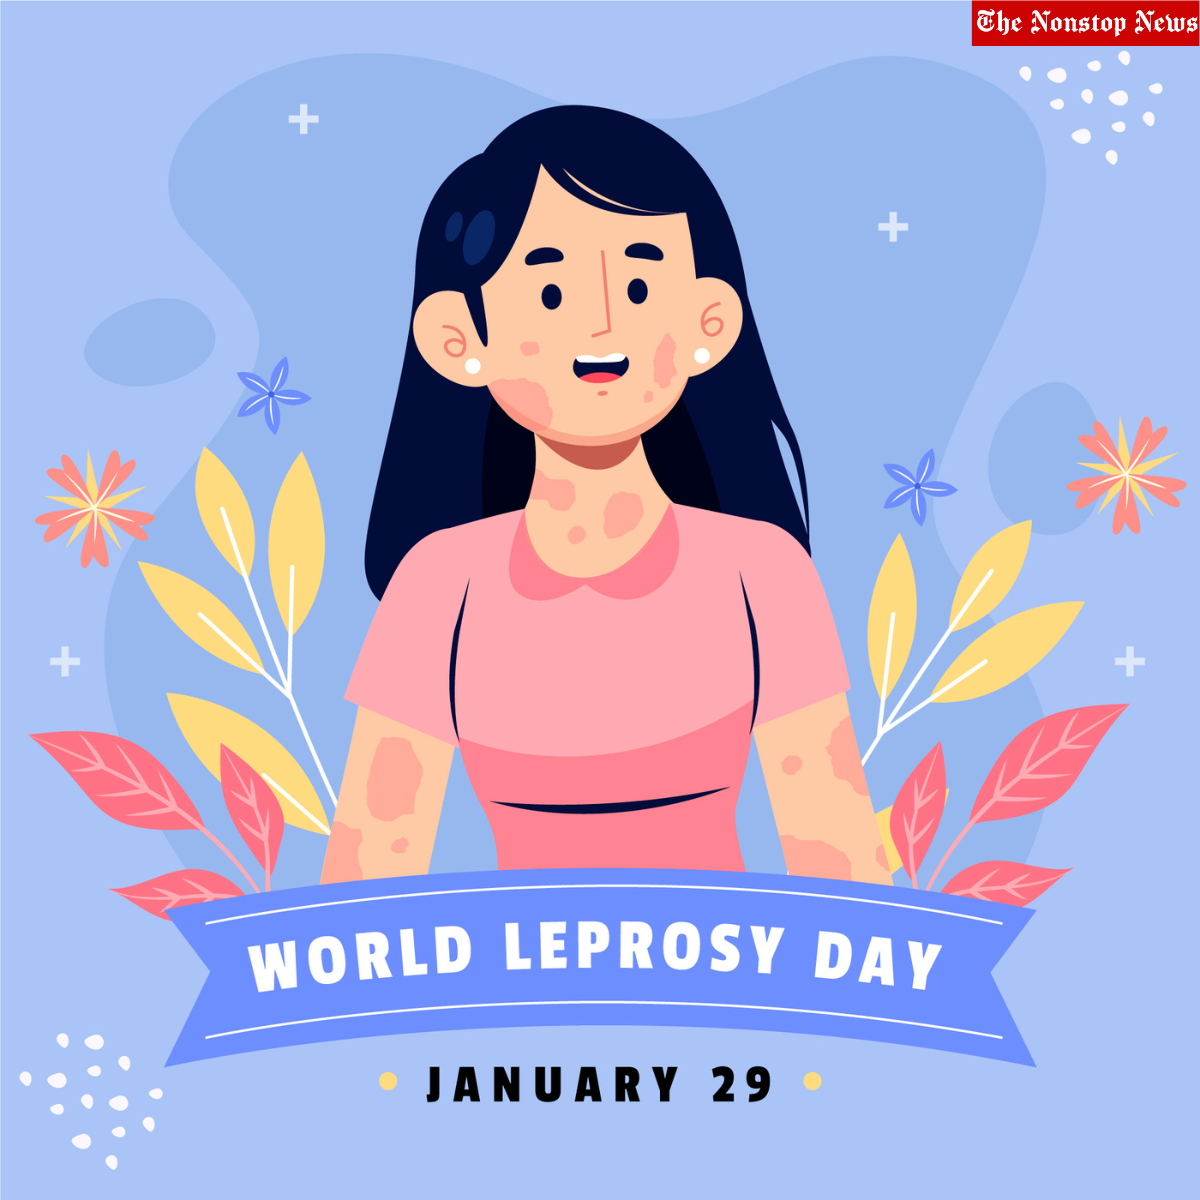 World Leprosy Day 2023 Theme, Images, Messages, Wishes, Posters, Banners, Greetings, Quotes and Slogans